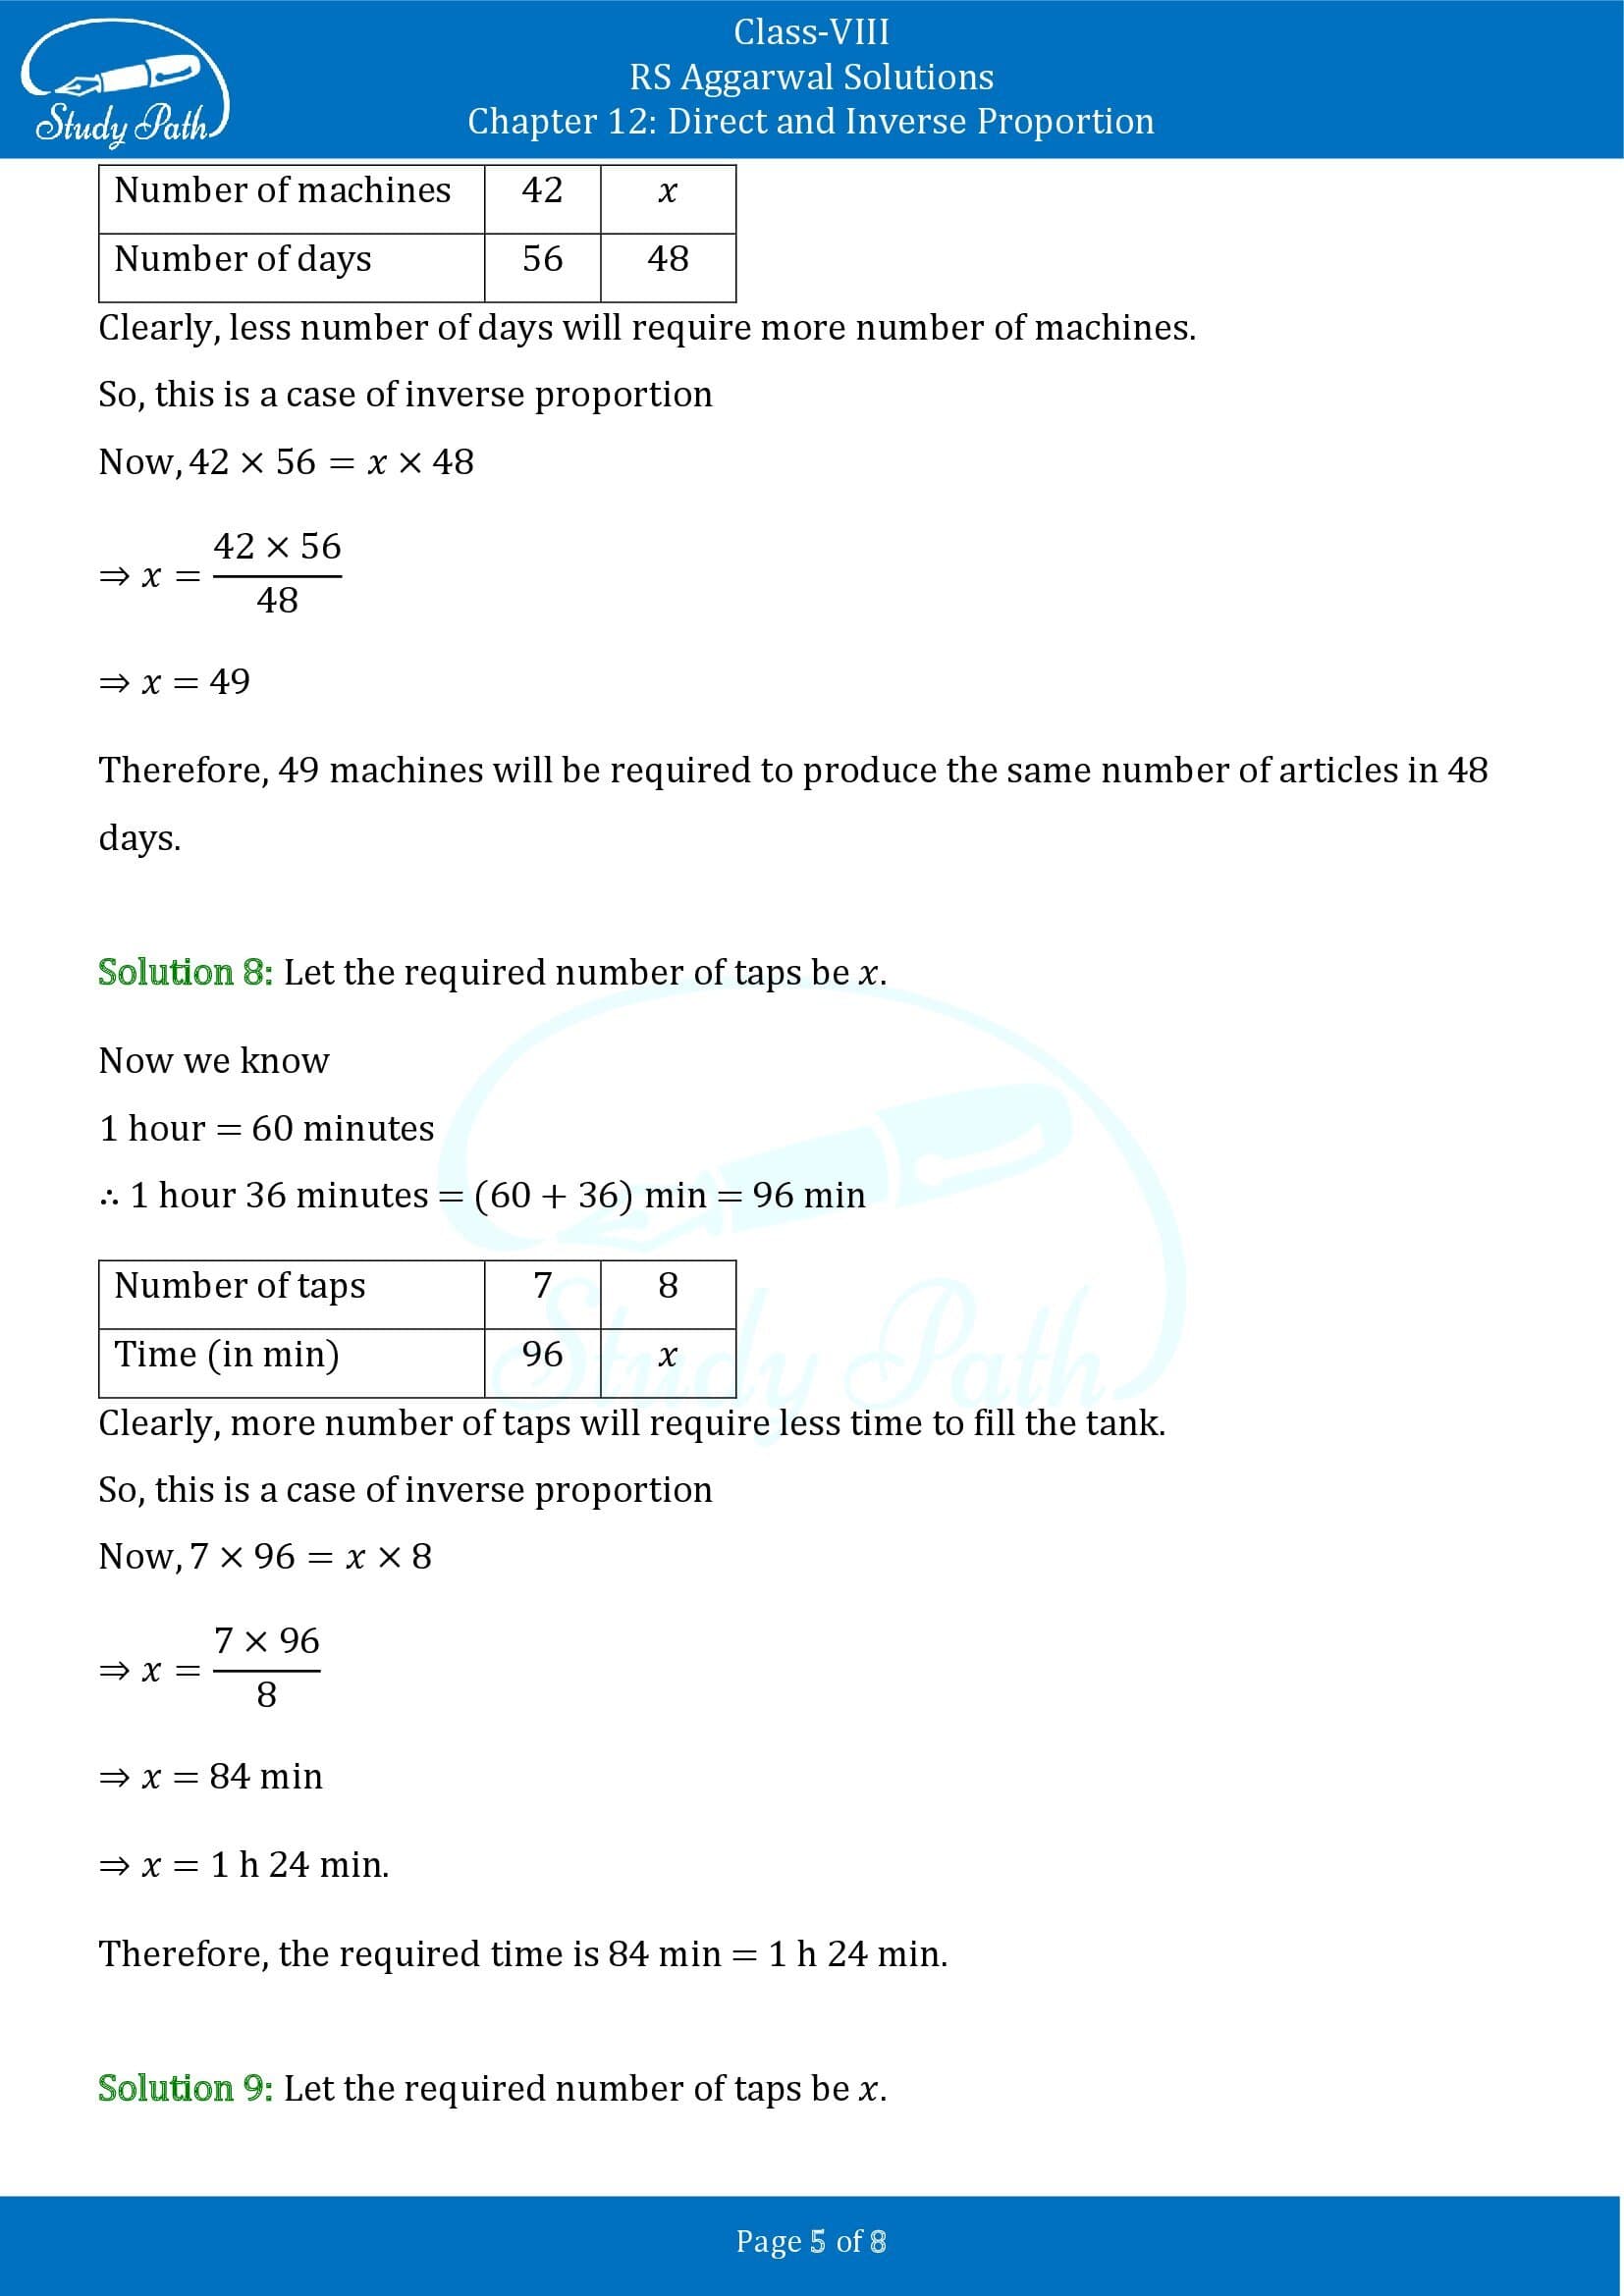 RS Aggarwal Solutions Class 8 Chapter 12 Direct and Inverse Proportion Exercise 12B 00005